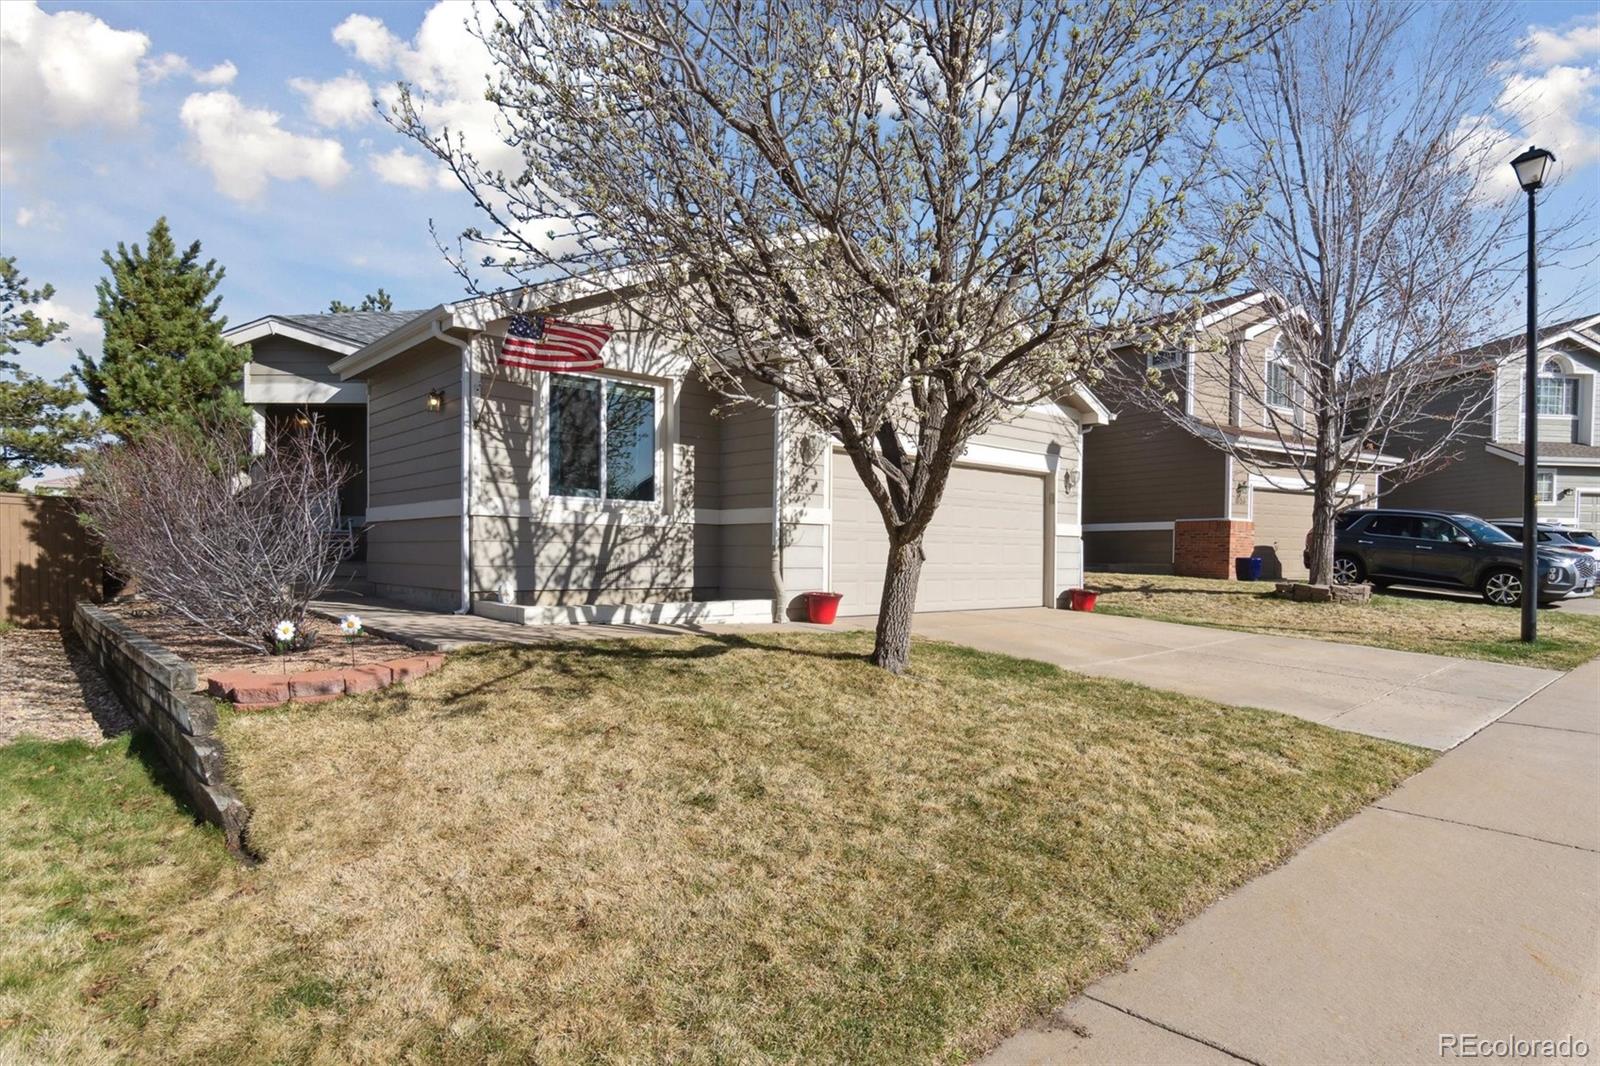 10155  cherryhurst lane, highlands ranch sold home. Closed on 2024-05-06 for $575,000.